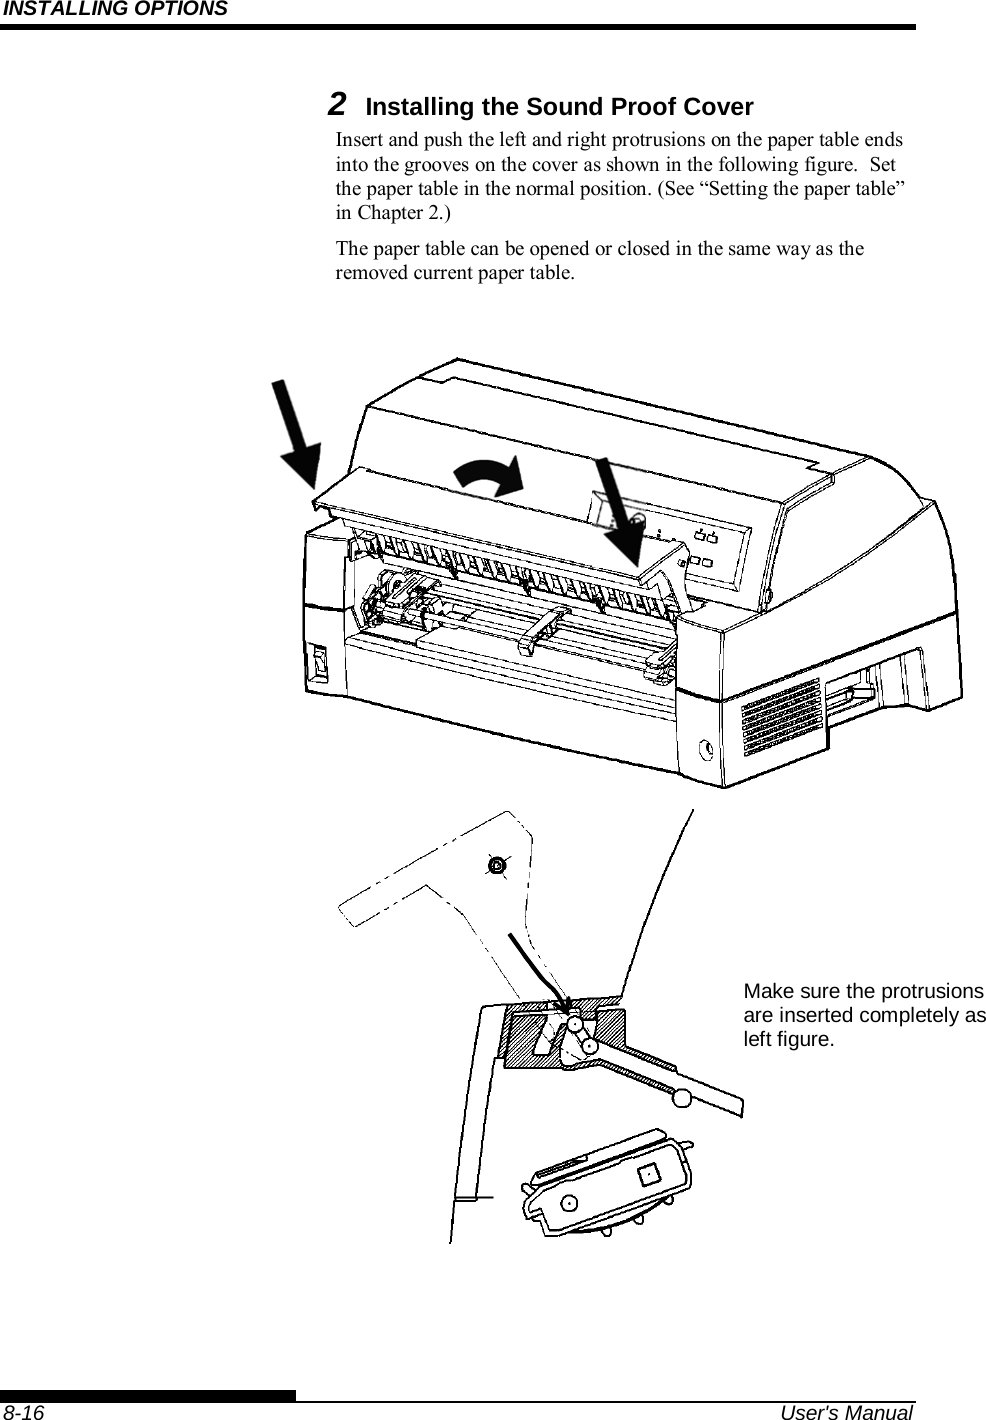 INSTALLING OPTIONS    8-16  User&apos;s Manual 2 Installing the Sound Proof Cover Insert and push the left and right protrusions on the paper table ends into the grooves on the cover as shown in the following figure.  Set the paper table in the normal position. (See “Setting the paper table” in Chapter 2.) The paper table can be opened or closed in the same way as the removed current paper table.       Make sure the protrusions are inserted completely as left figure. 